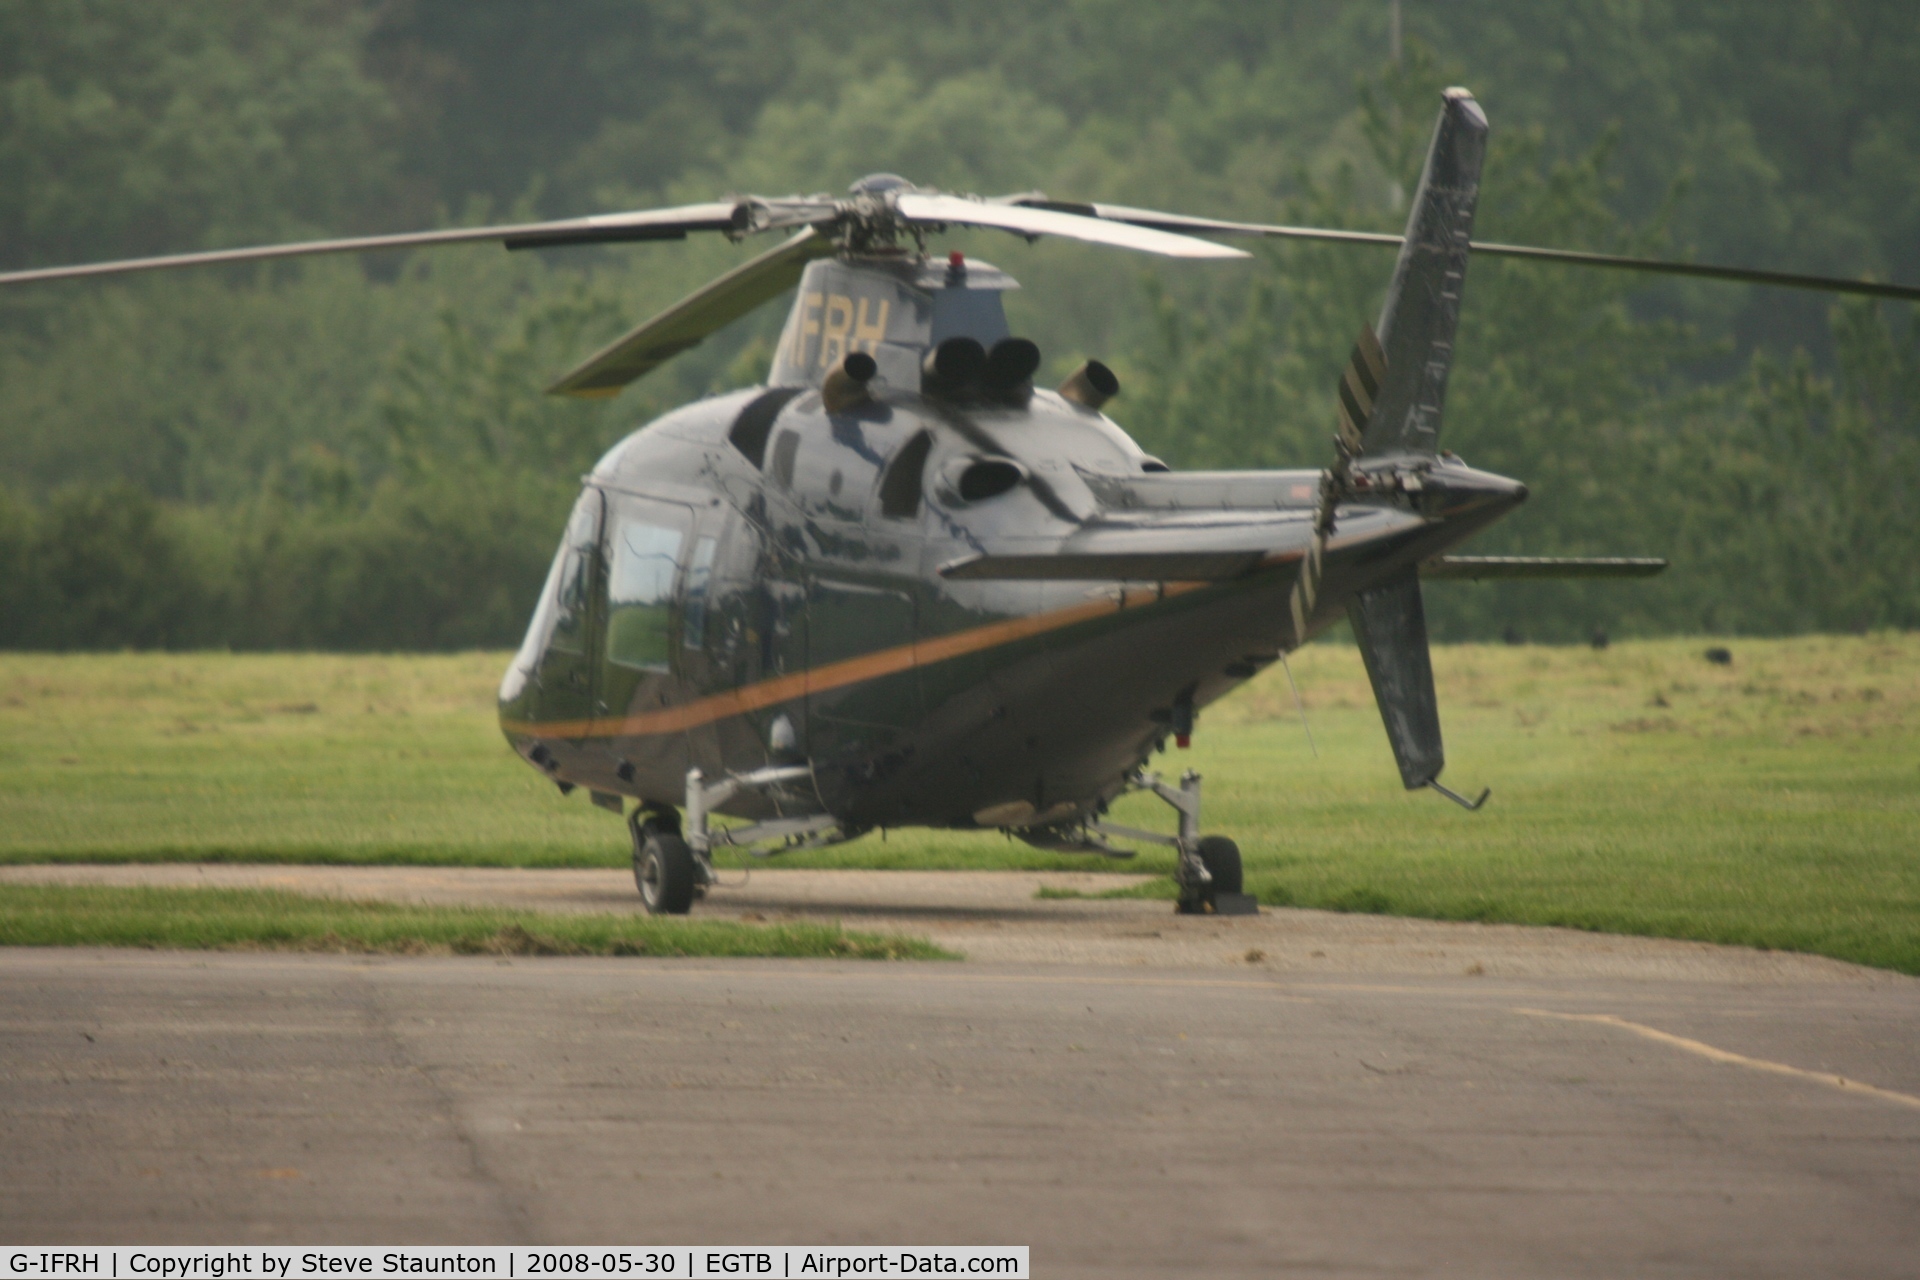 G-IFRH, 1990 Agusta A-109C C/N 7619, Taken at Wycombe Air Park using my new Sigma 50 to 500 APO DG HSM lens (The Beast)